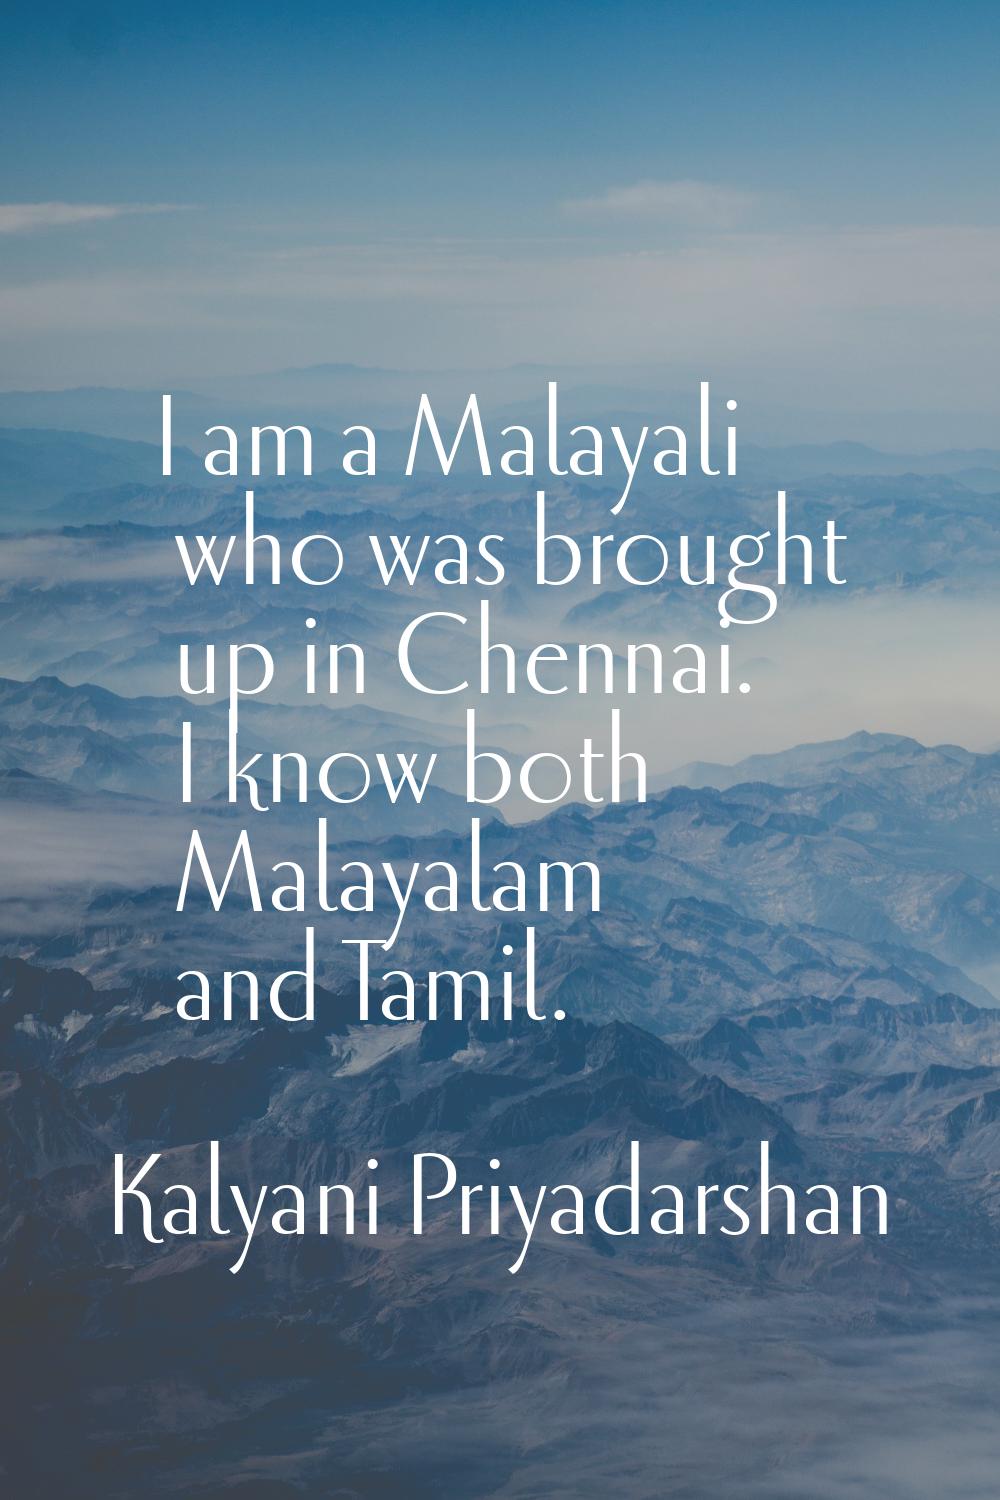 I am a Malayali who was brought up in Chennai. I know both Malayalam and Tamil.